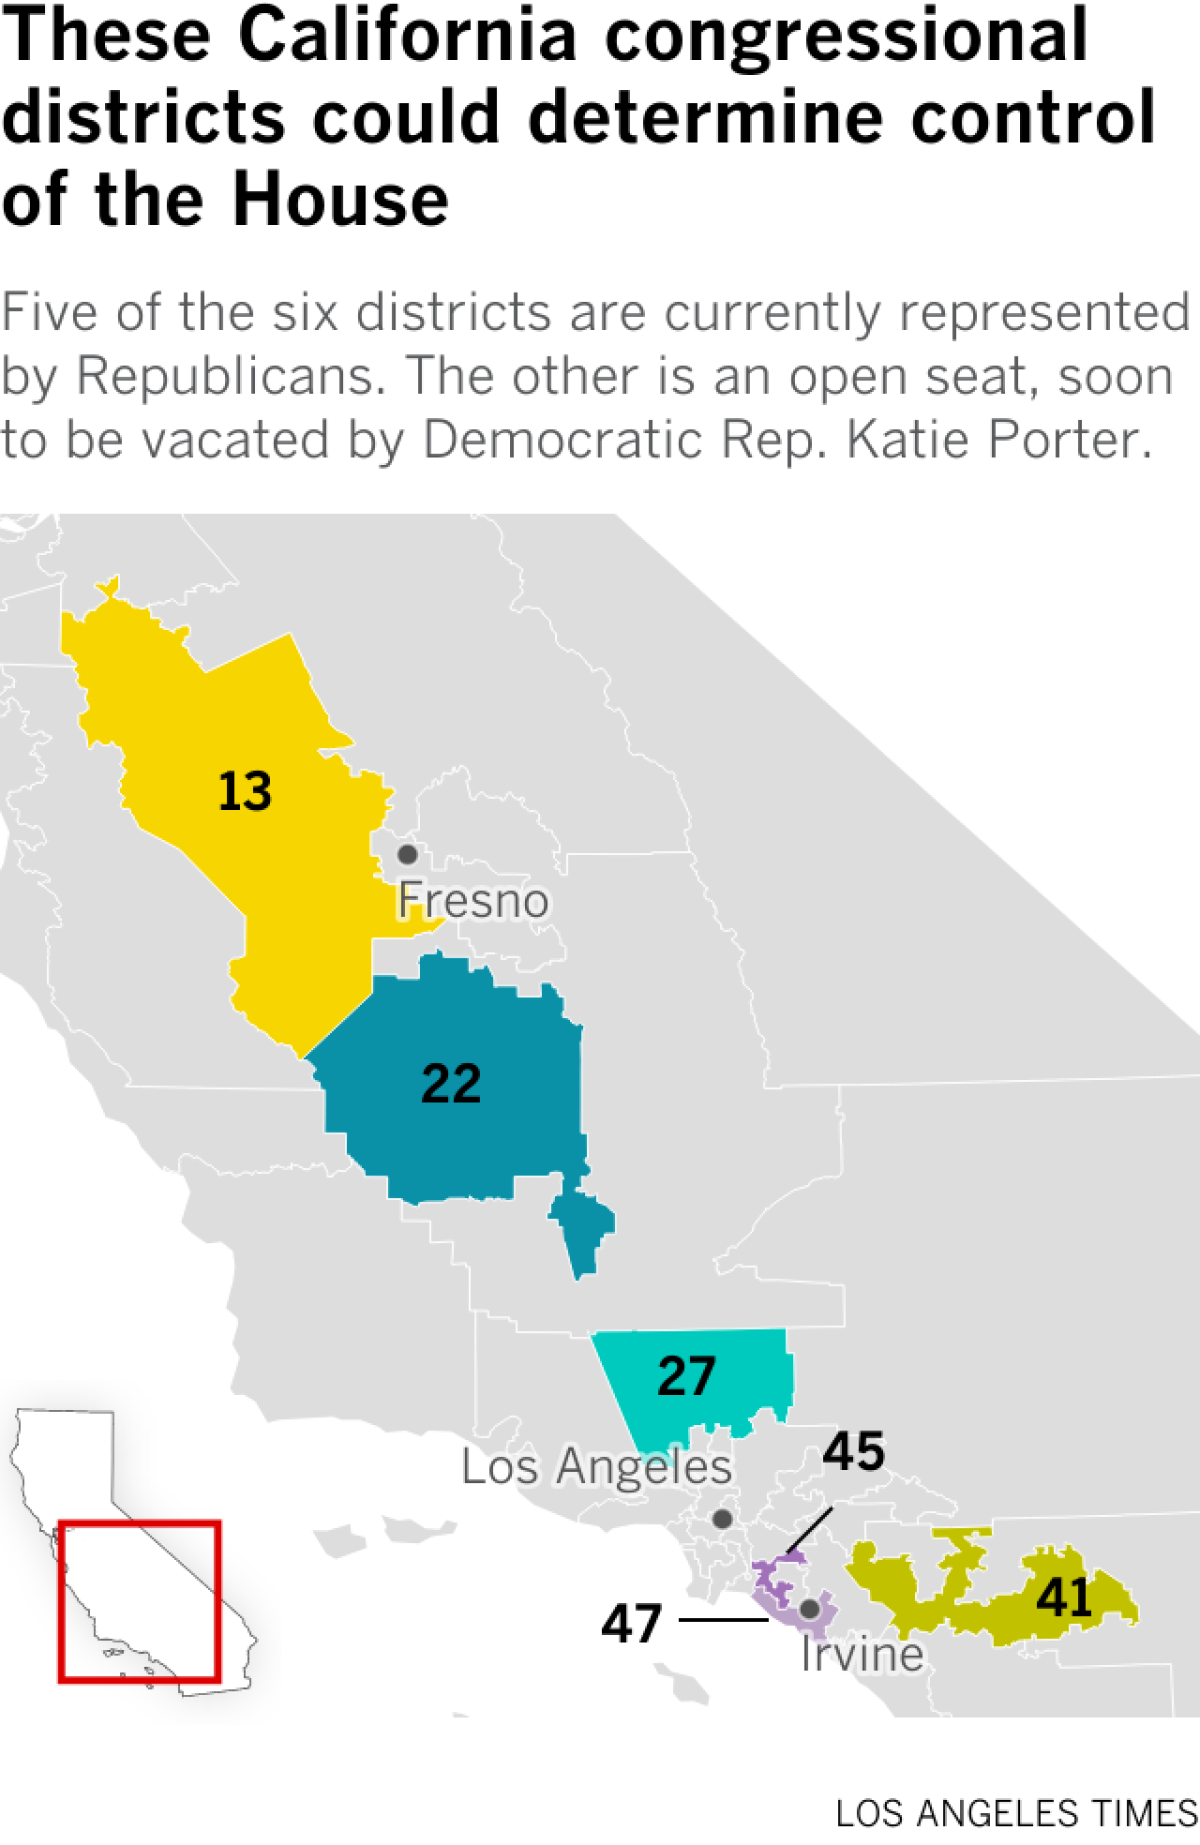 Map shows congressional districts 13, 22, 27, 41, 45 and 47 in California.